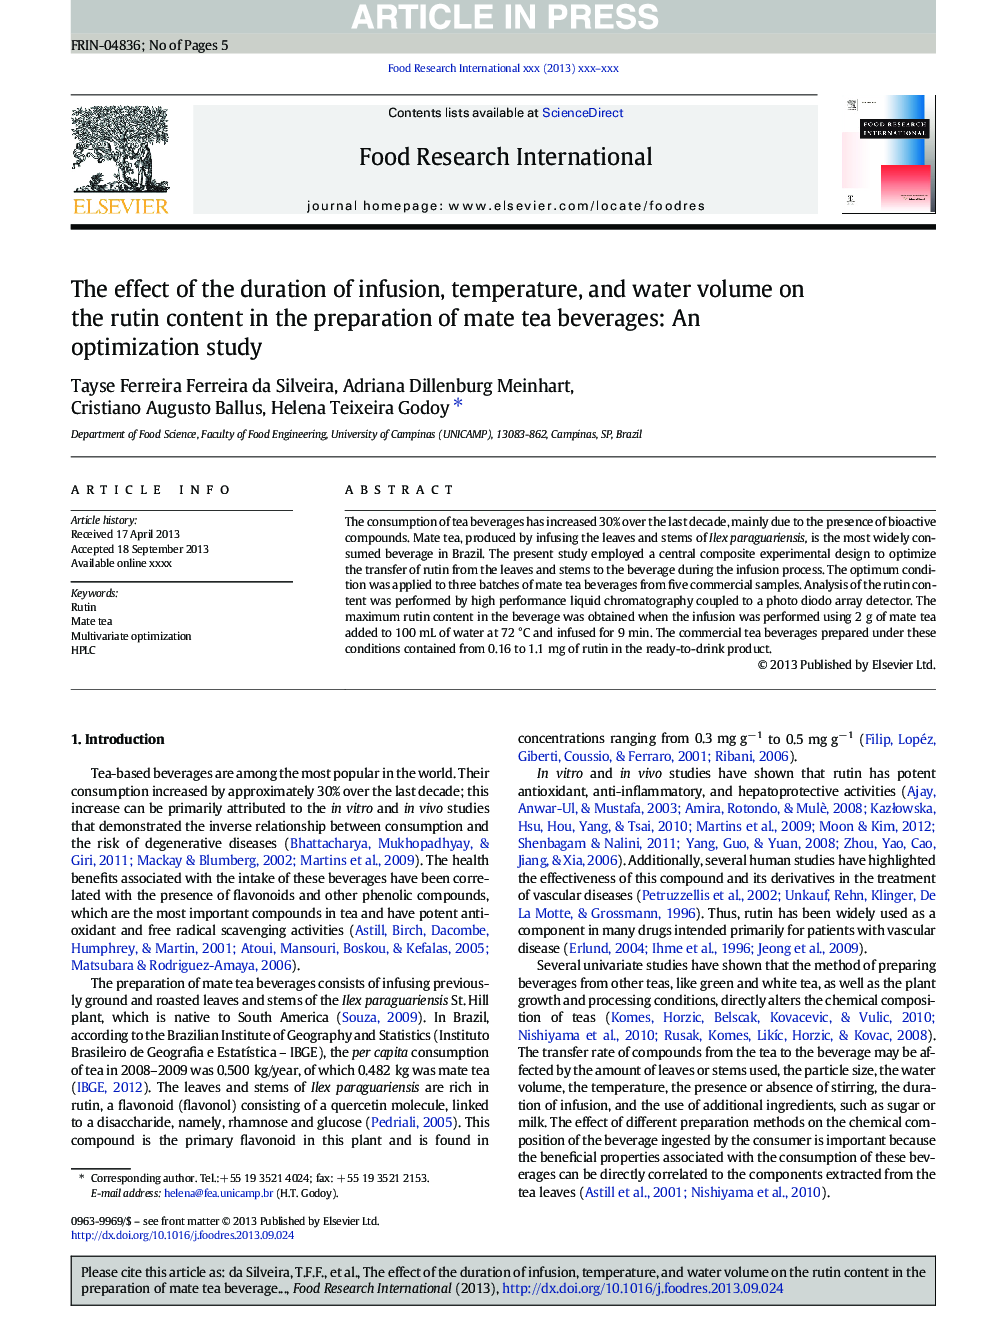 The effect of the duration of infusion, temperature, and water volume on the rutin content in the preparation of mate tea beverages: An optimization study